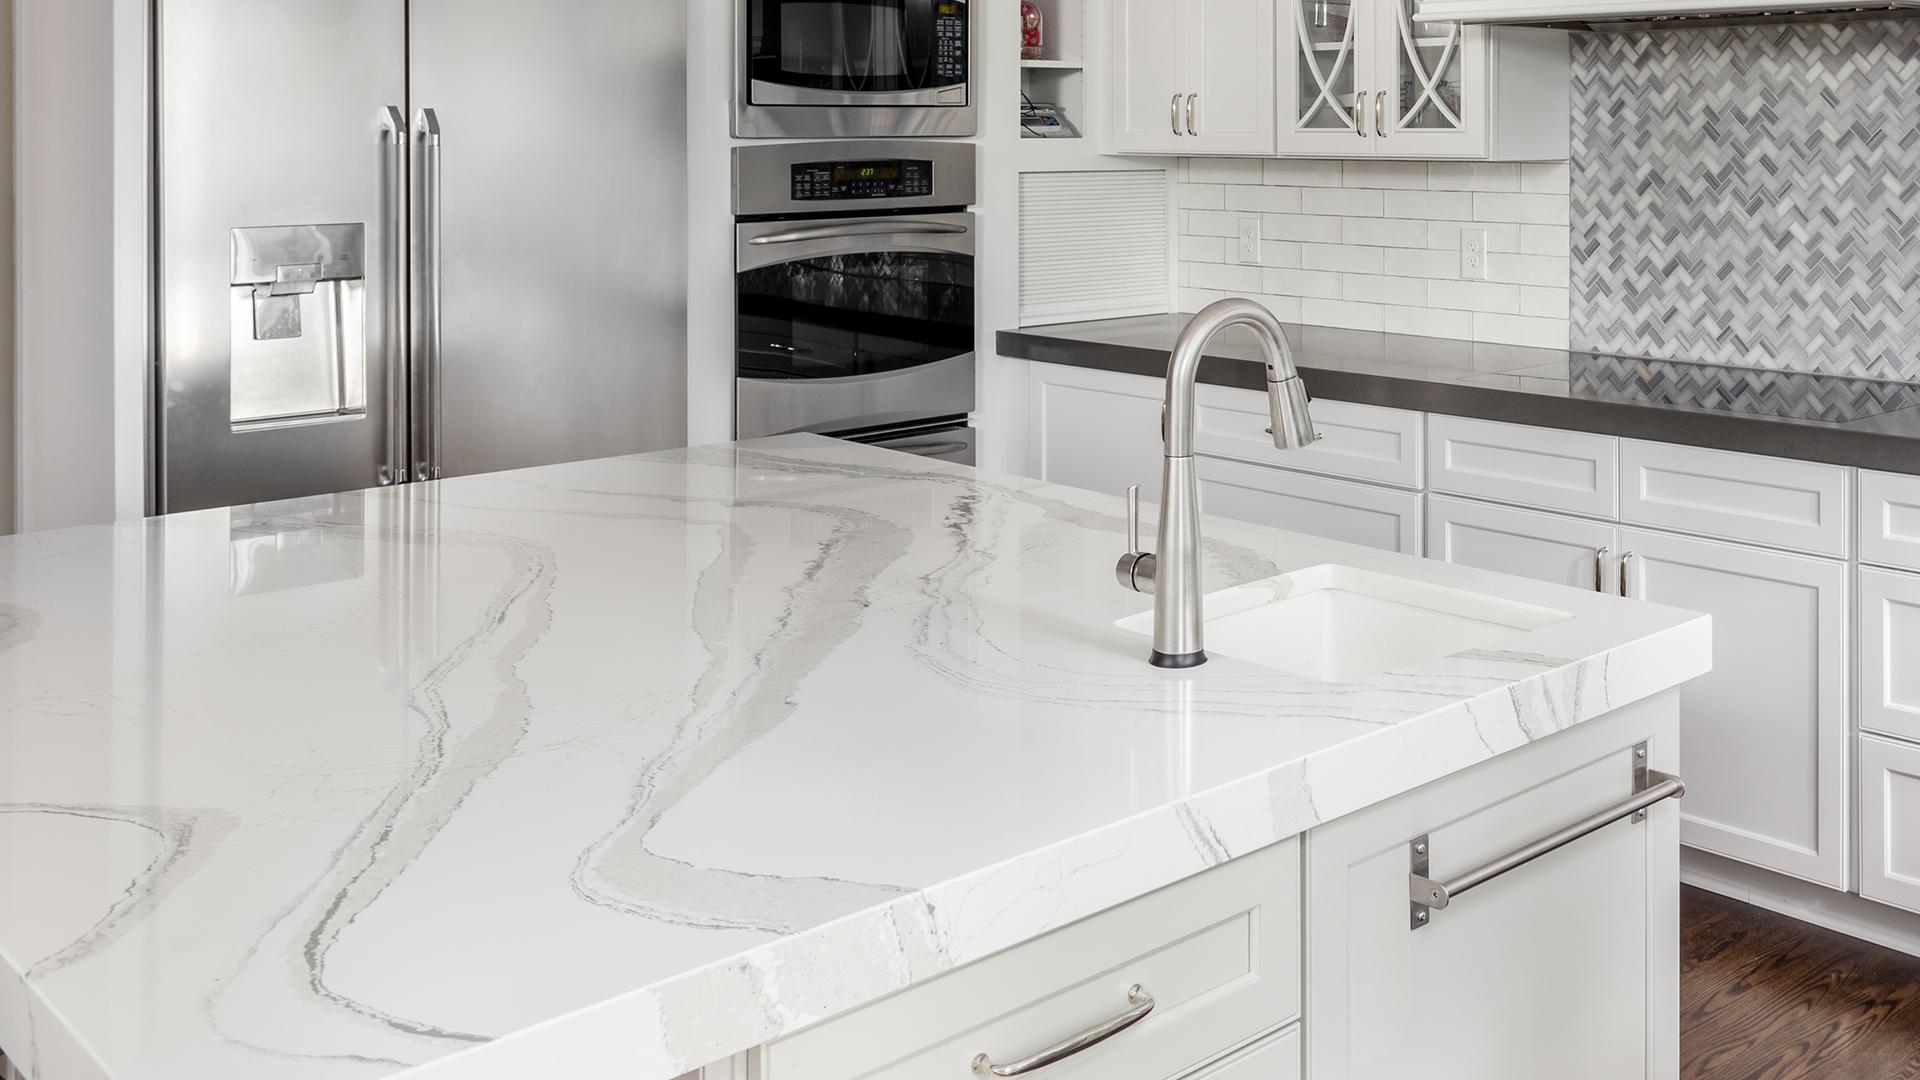 How To Diy Faux Marble Countertops For Under 100 According To A